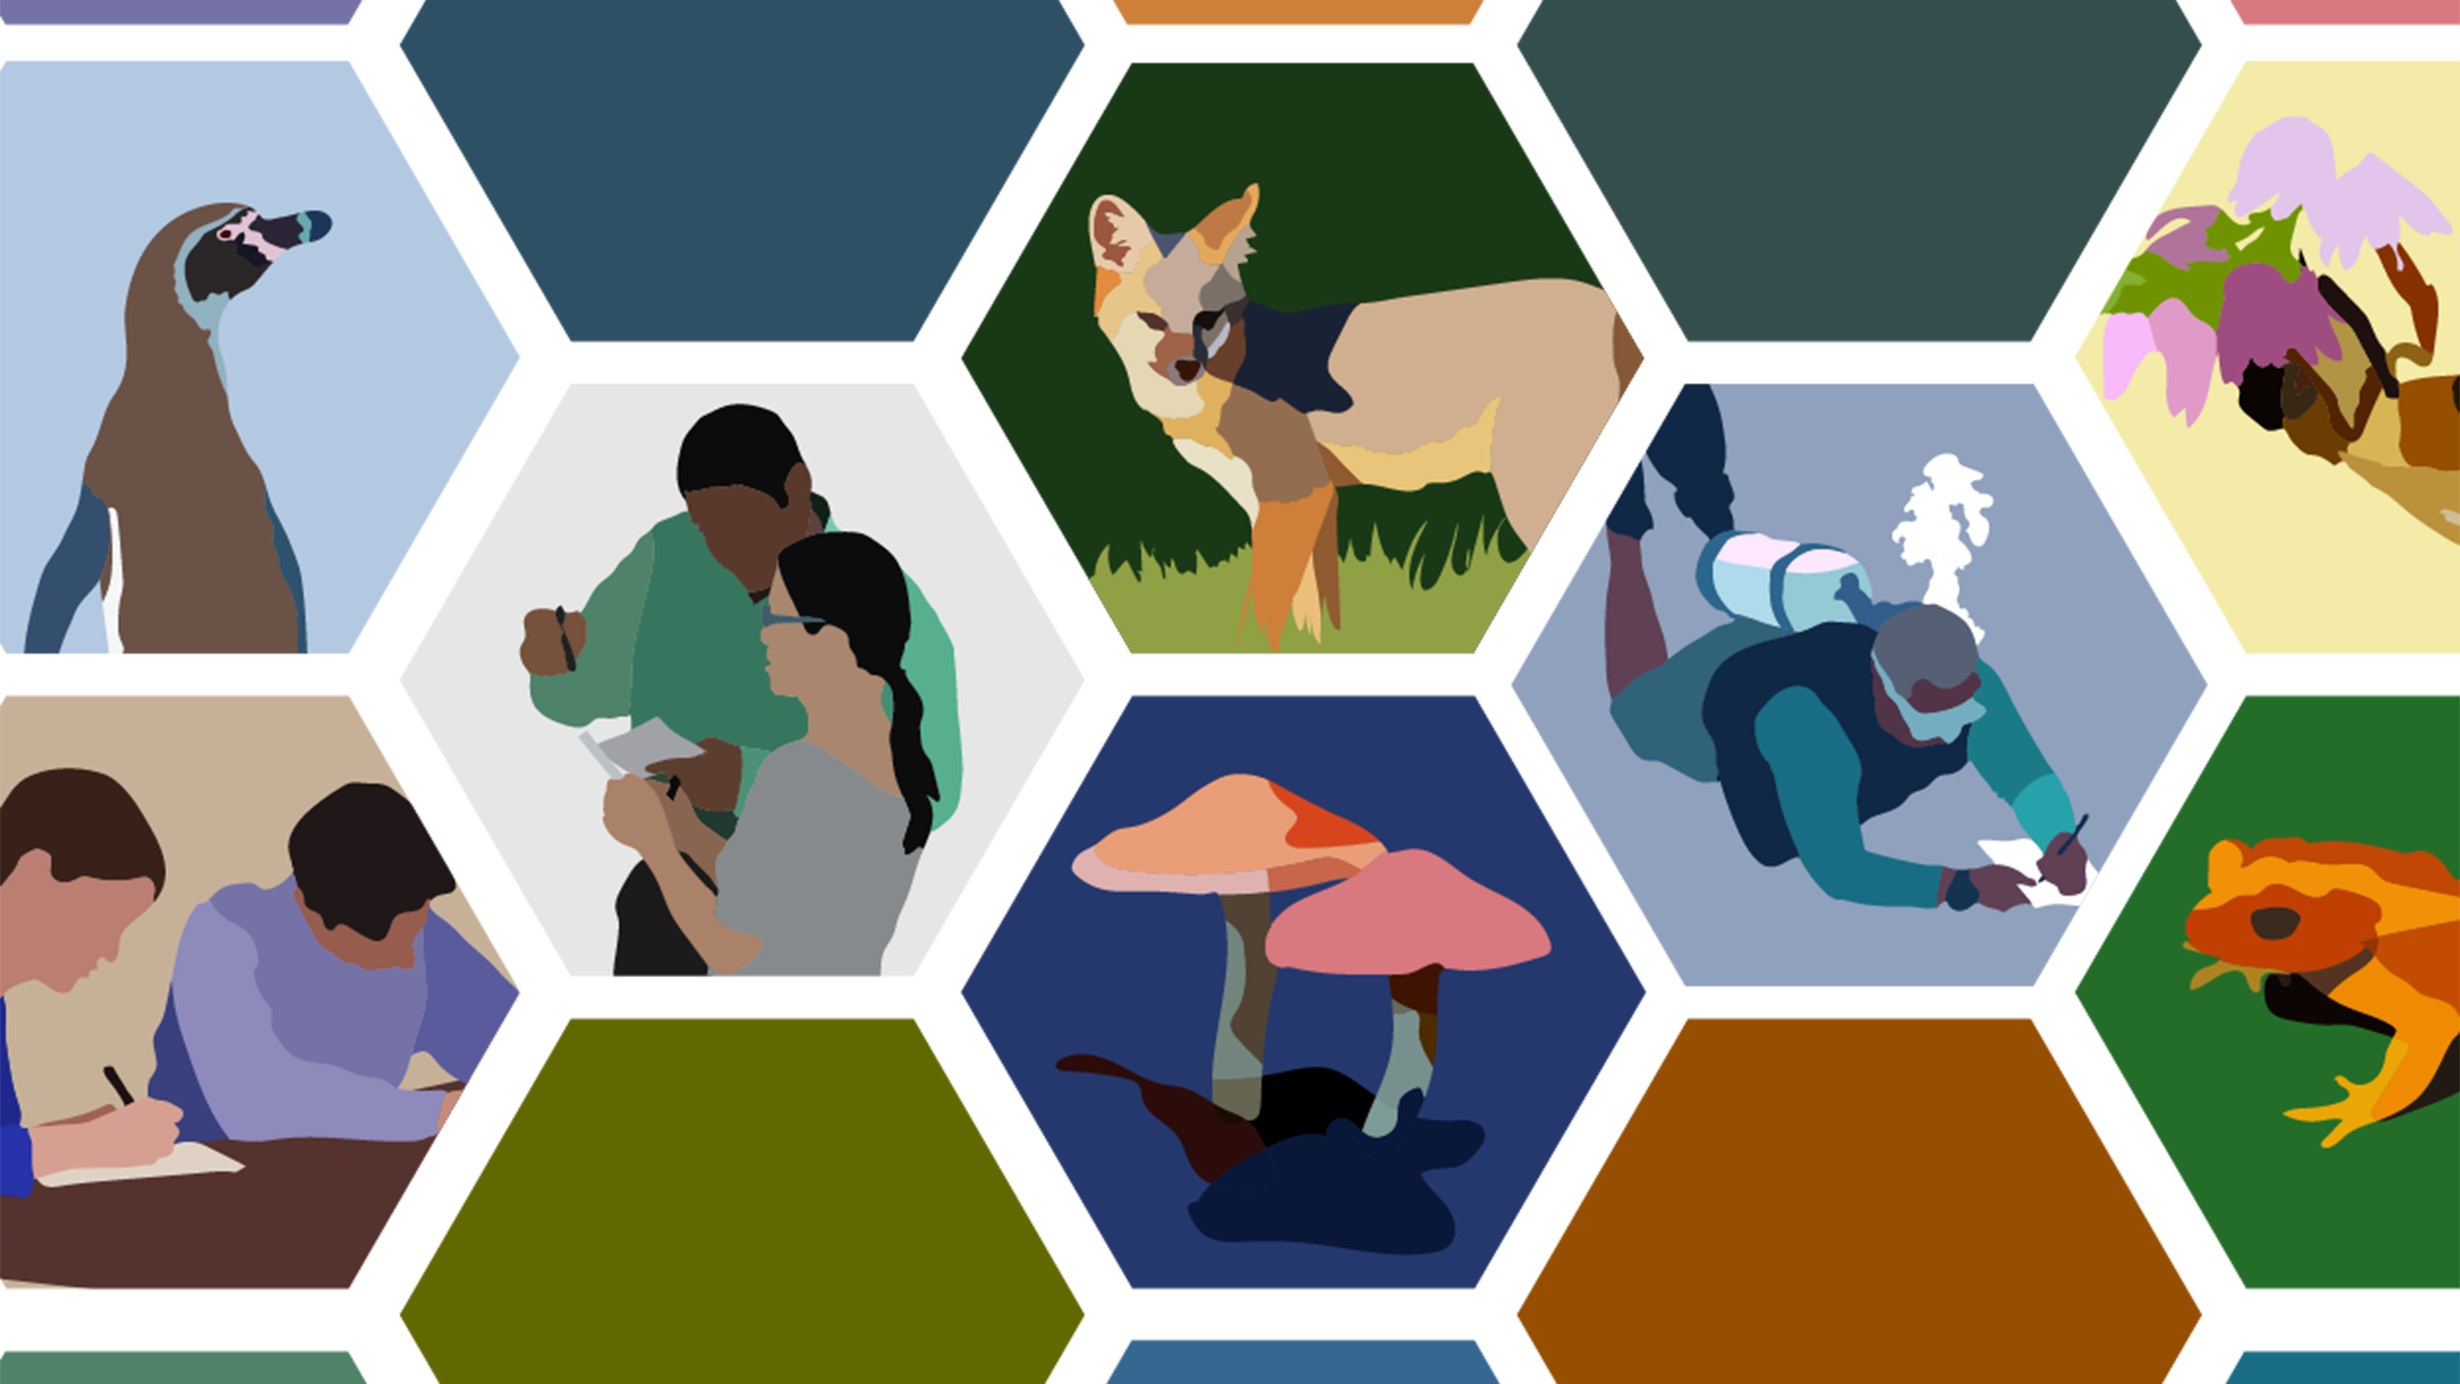 A collage of hexagon-shaped graphics, some filled with solid color and others filled with image of science and nature.